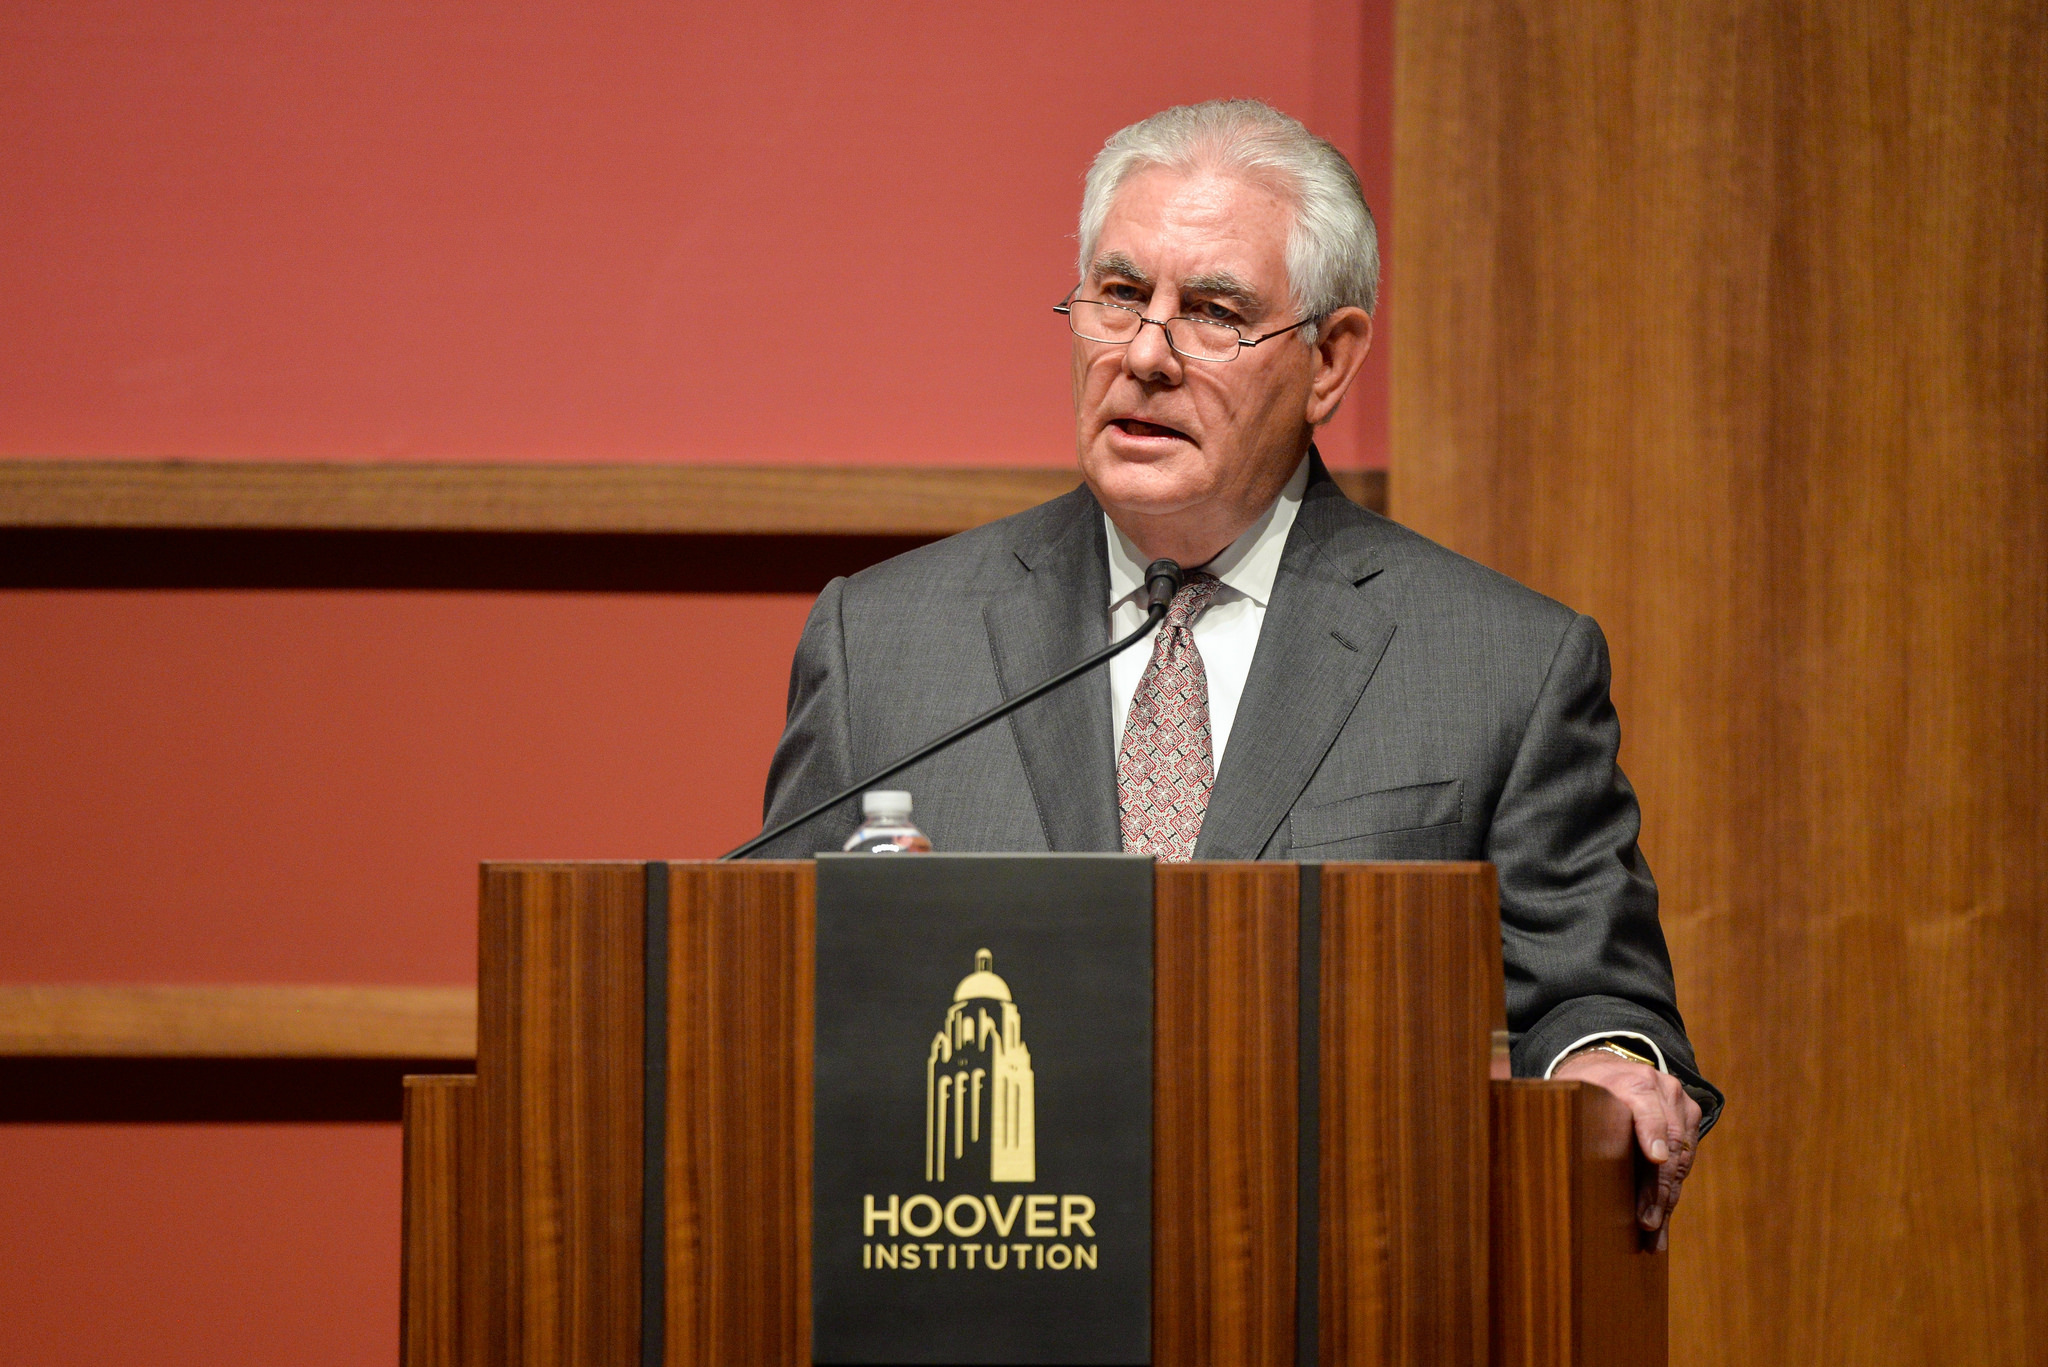 U.S. Secretary of State Rex Tillerson delivers remarks on the Way Forward for the United States regarding Syria, at the Hoover Institute, Stanford University, in Stanford, California on January 17, 2018. [State Department Photo/ Public Domain]